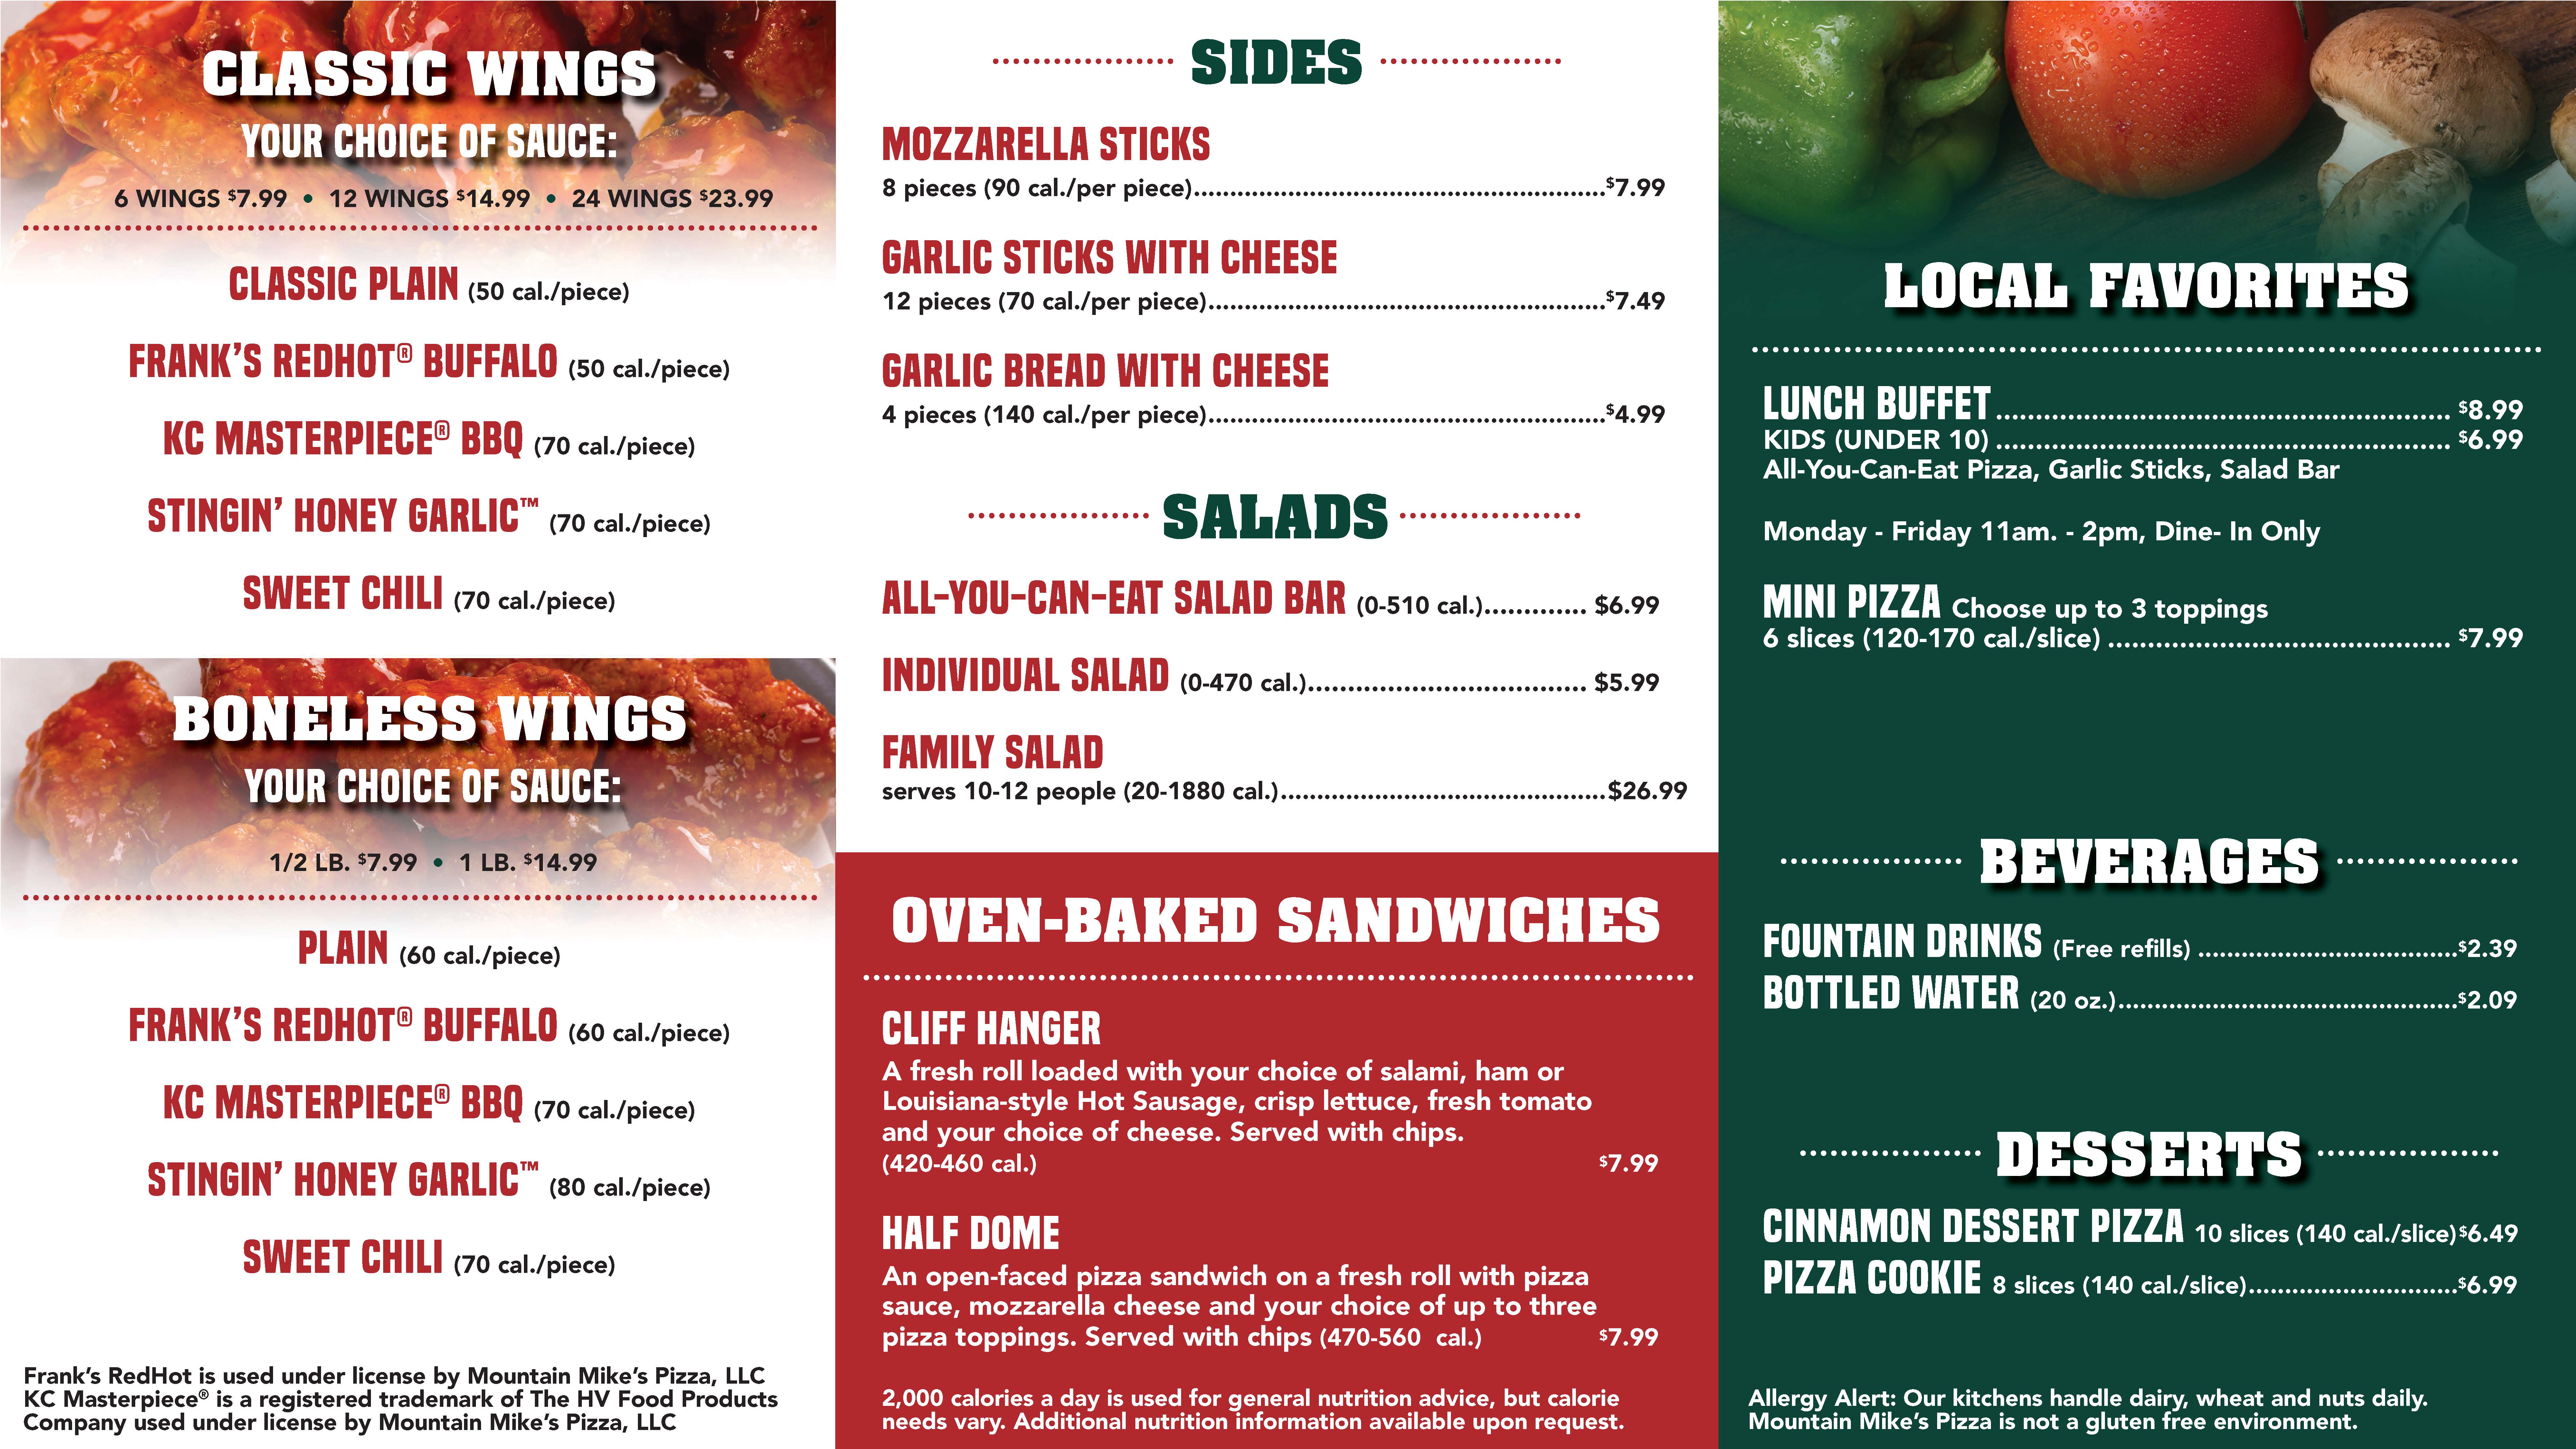 Menu for chicken wings, sandwiches, buffet, beverages, and desserts.